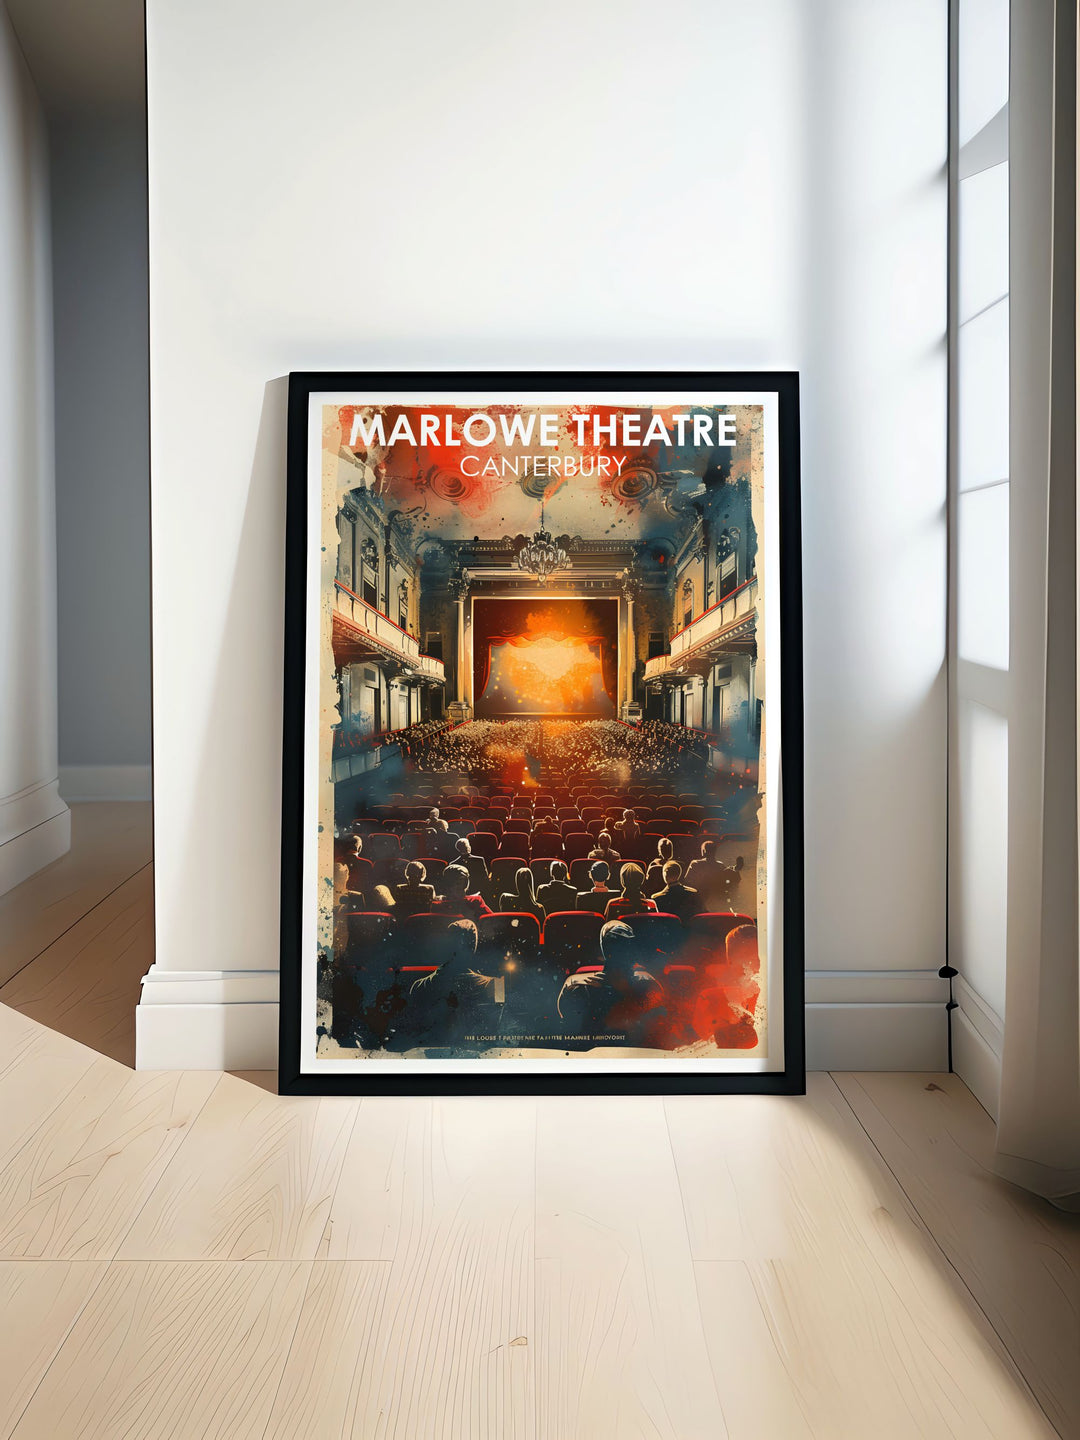 Showcasing both Canterbury and the Marlowe Theatre, this travel poster captures the unique blend of history and culture, perfect for enhancing your living space with elegant charm.